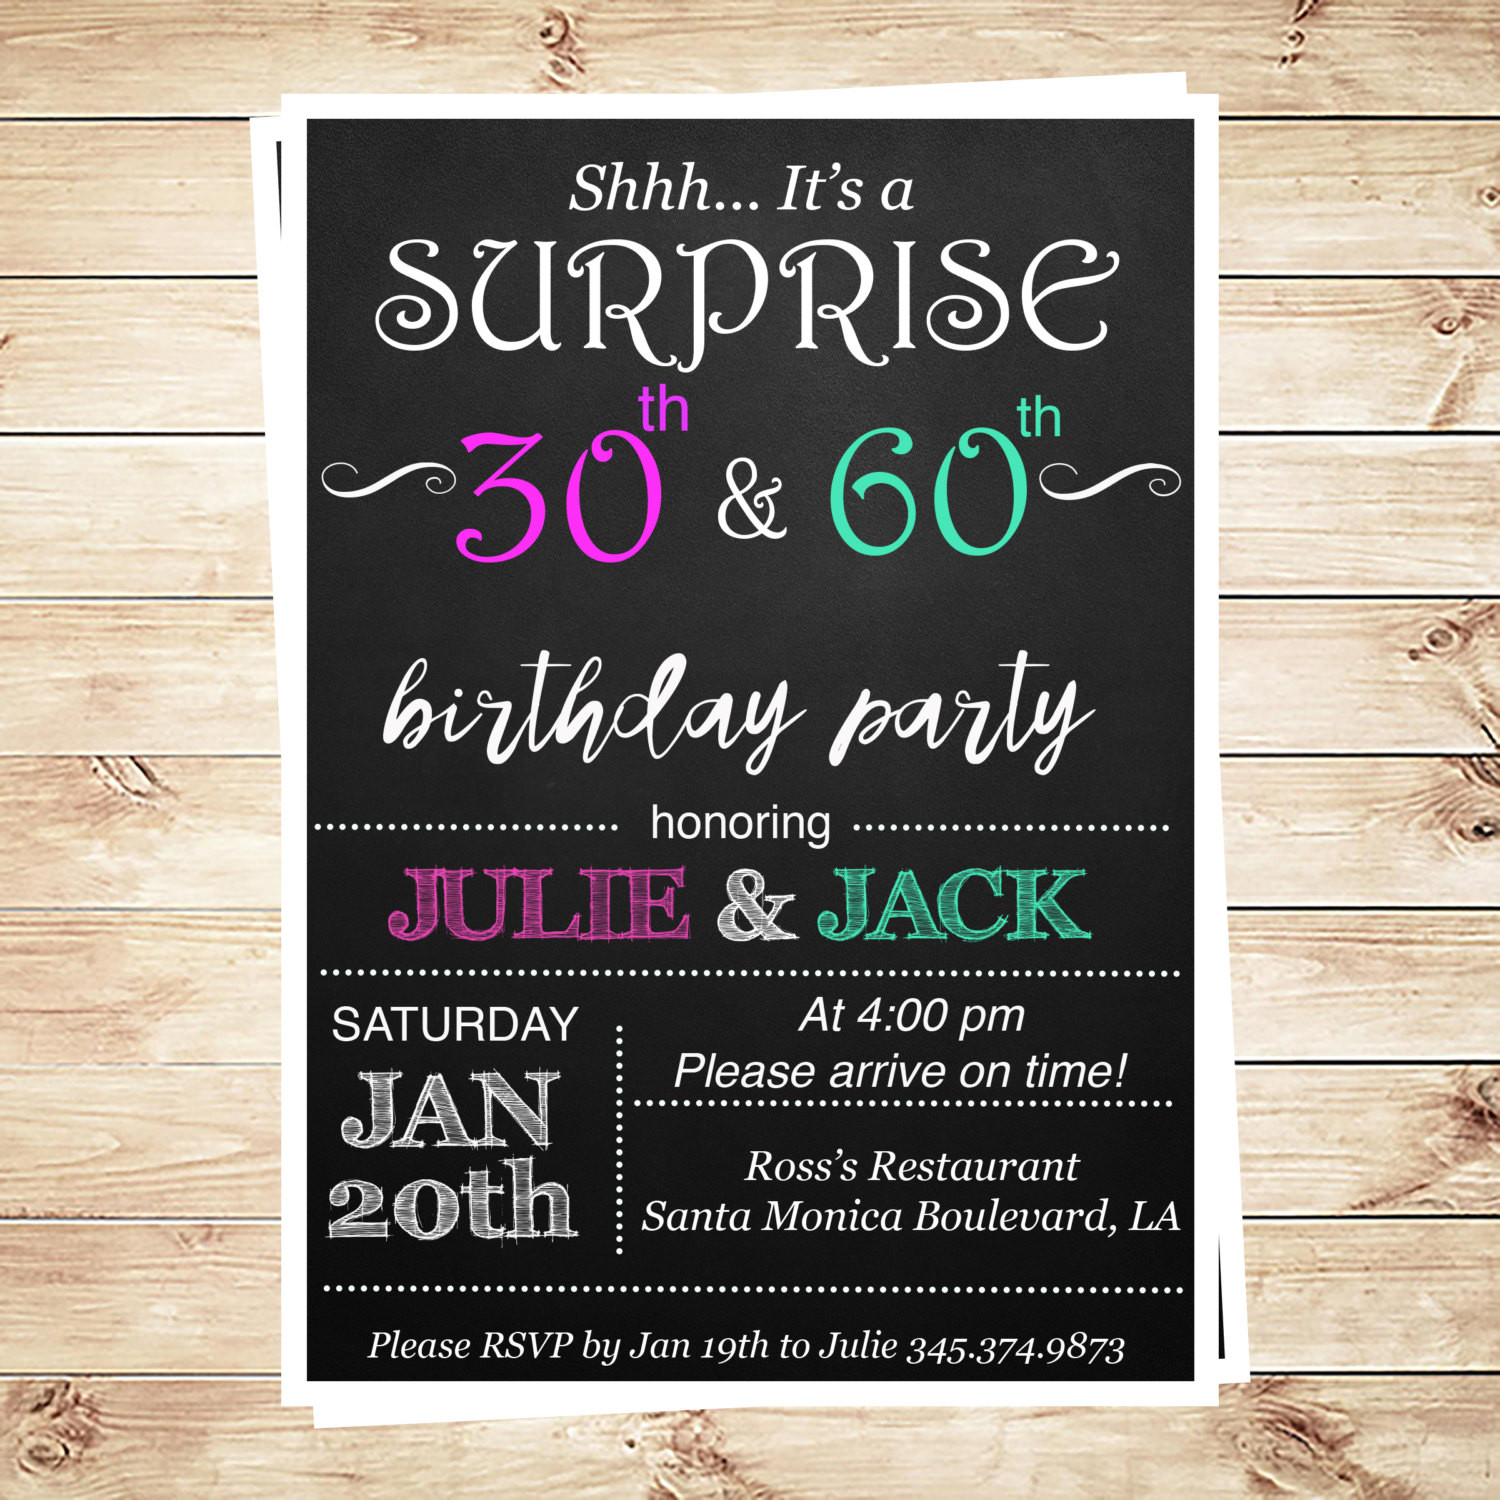 Birthday Invitations For Adults
 Joint birthday party invitations for adults by